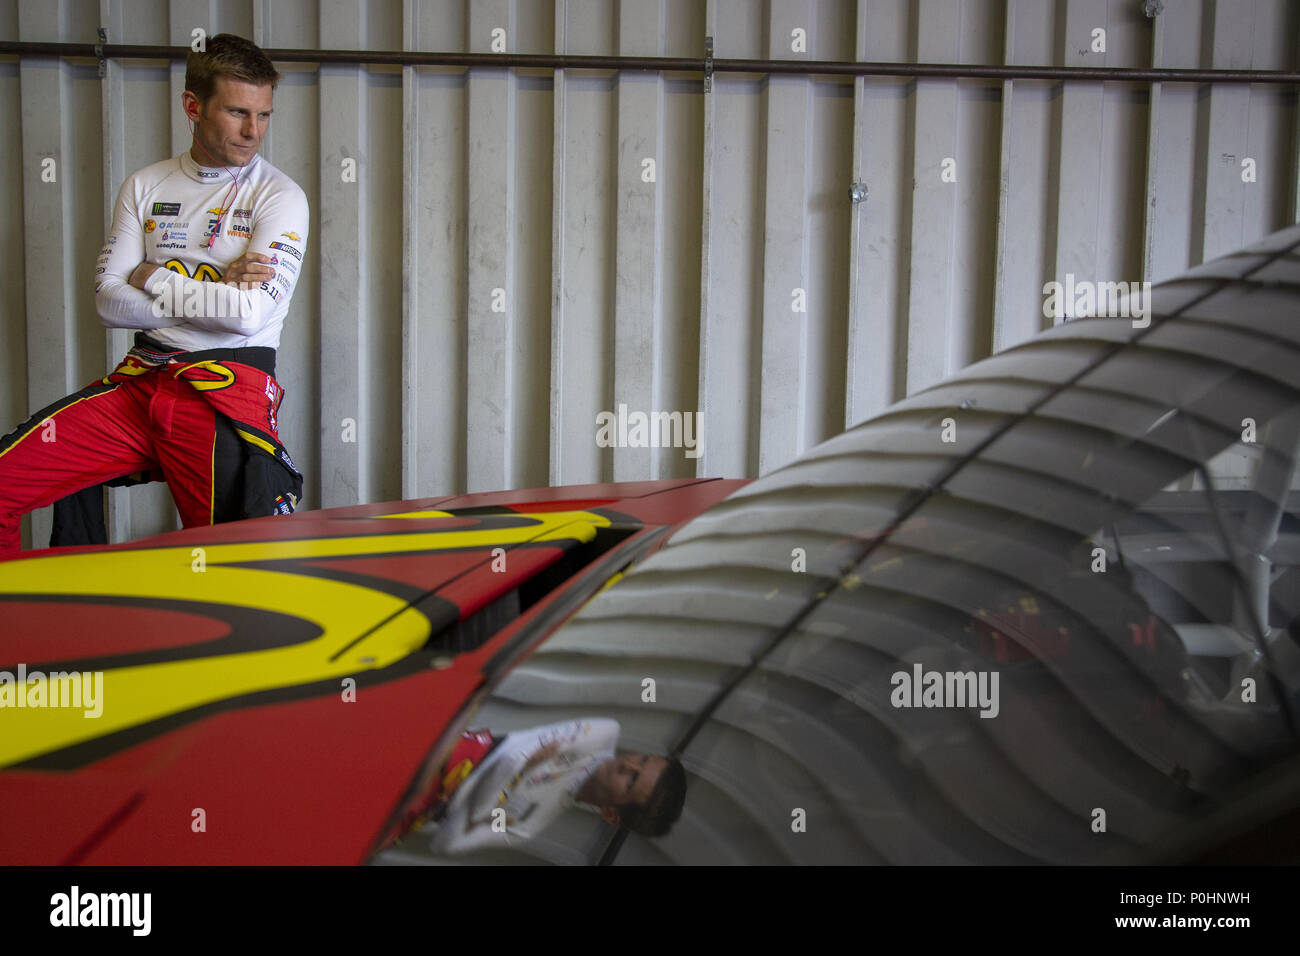 Brooklyn, Michigan, USA. 8th June, 2018. Jamie McMurray (1) gets ready to practice for the FireKeepers Casino 400 at Michigan International Speedway in Brooklyn, Michigan. Credit: Stephen A. Arce/ASP/ZUMA Wire/Alamy Live News Stock Photo